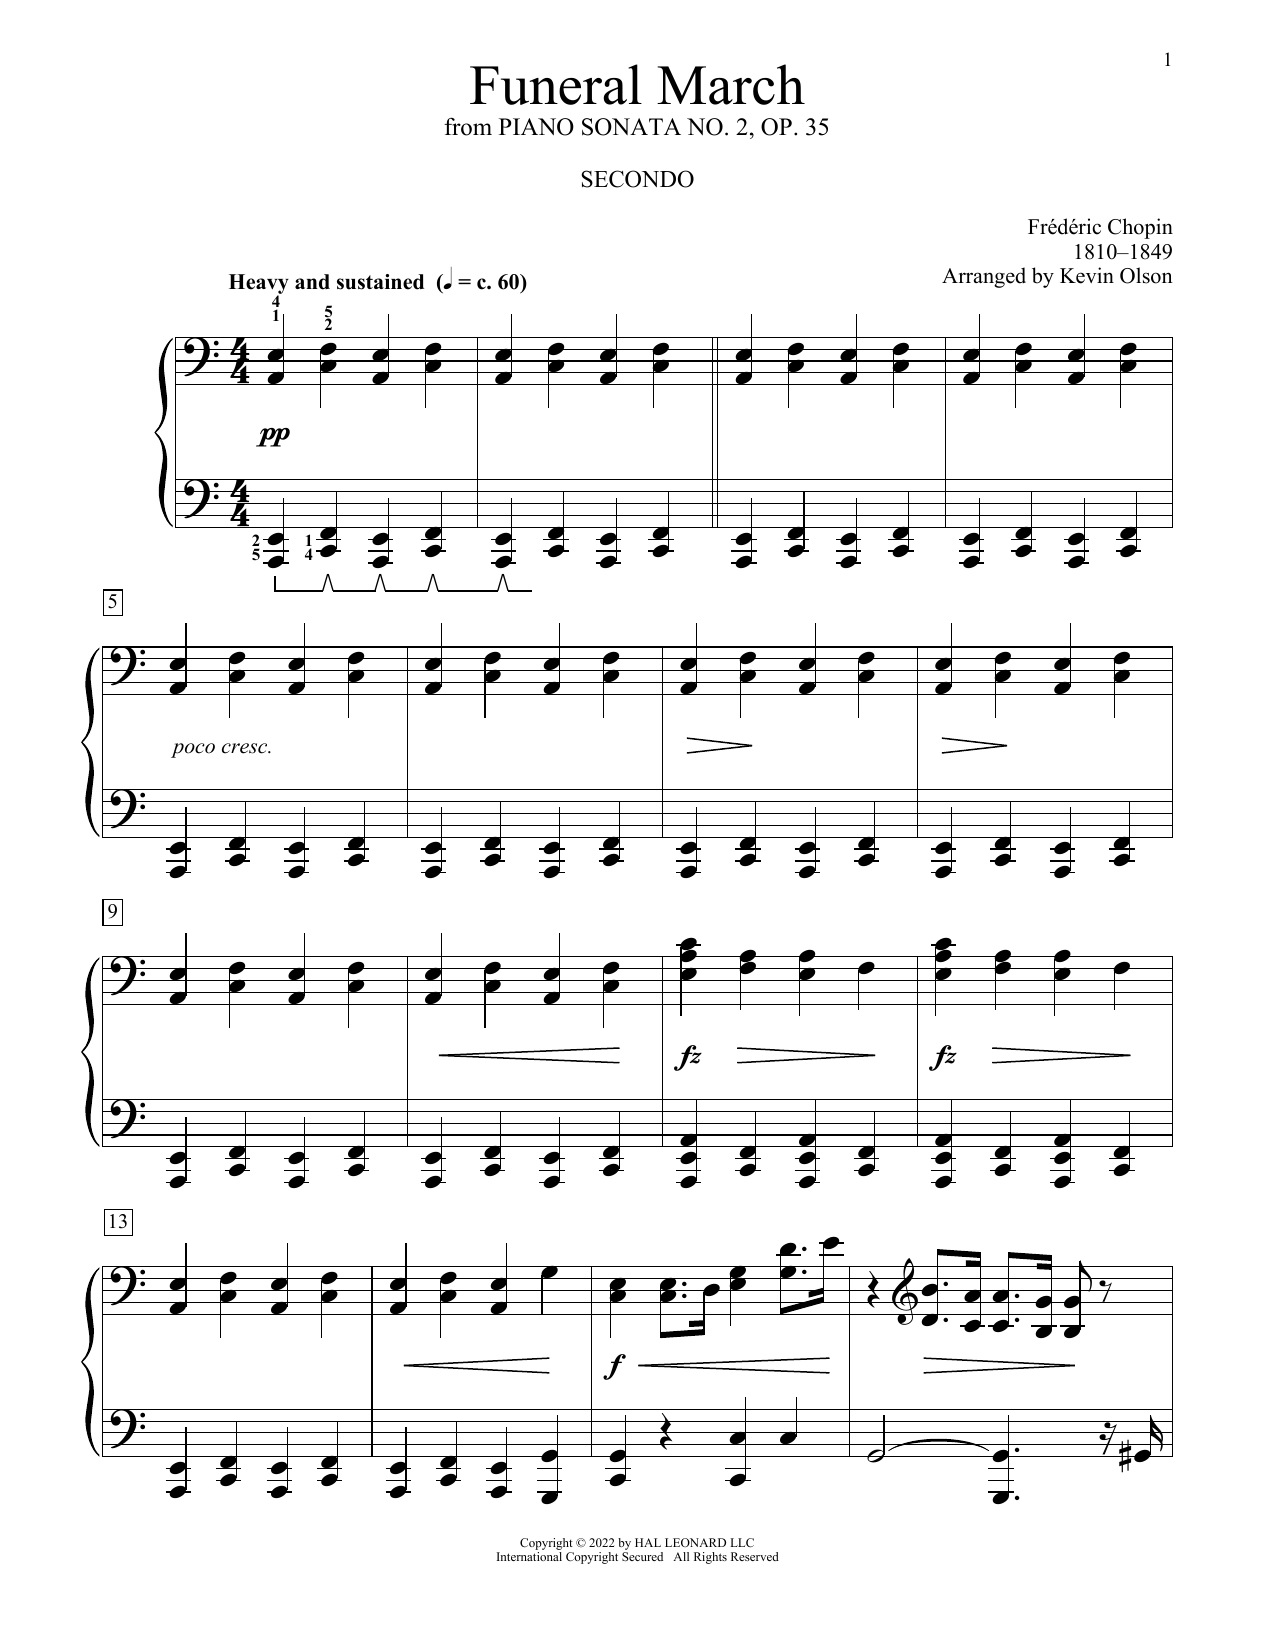 Download Frederic Chopin Funeral March (Marche Funebre), Op. 35 Sheet Music